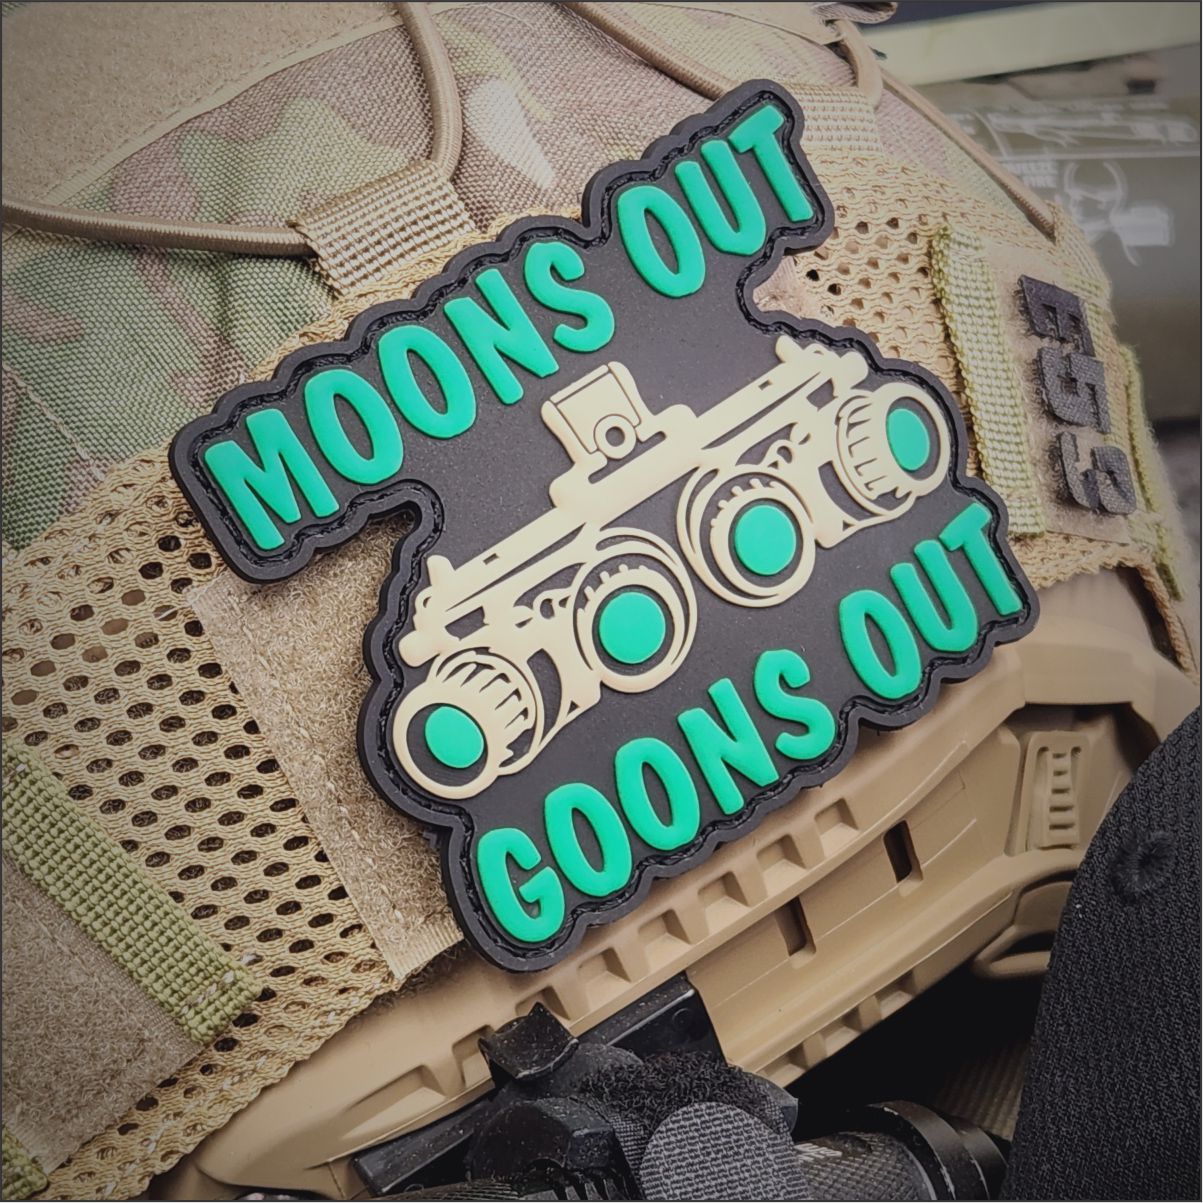 Moons Out Goons Out - Glow in the Dark - PVC Patch